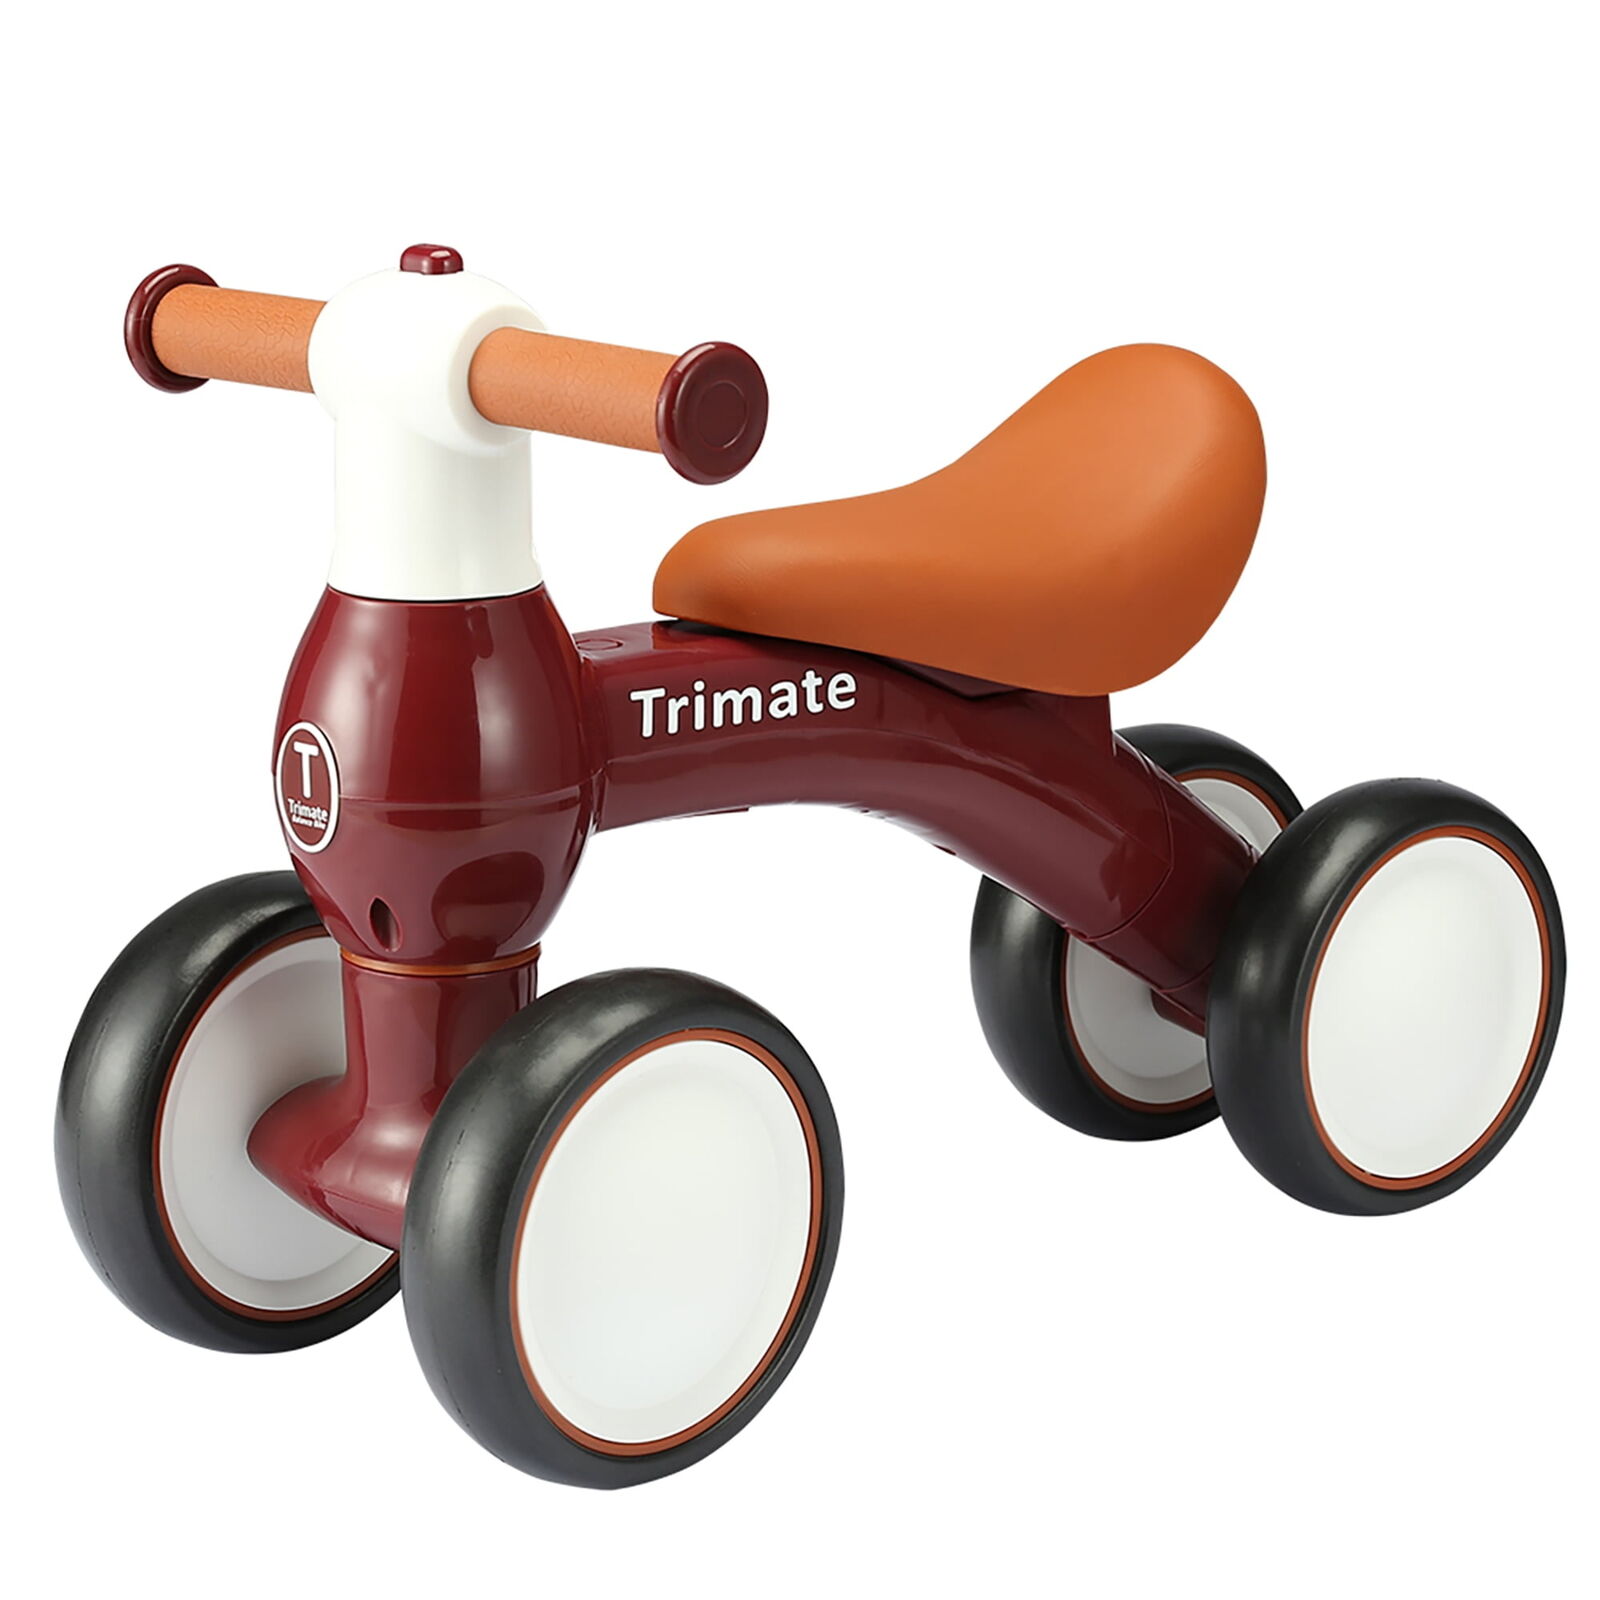 Baby Walker Balance Bike, Wine Red - Perfect Ride-On Toy for 1-Year-Olds